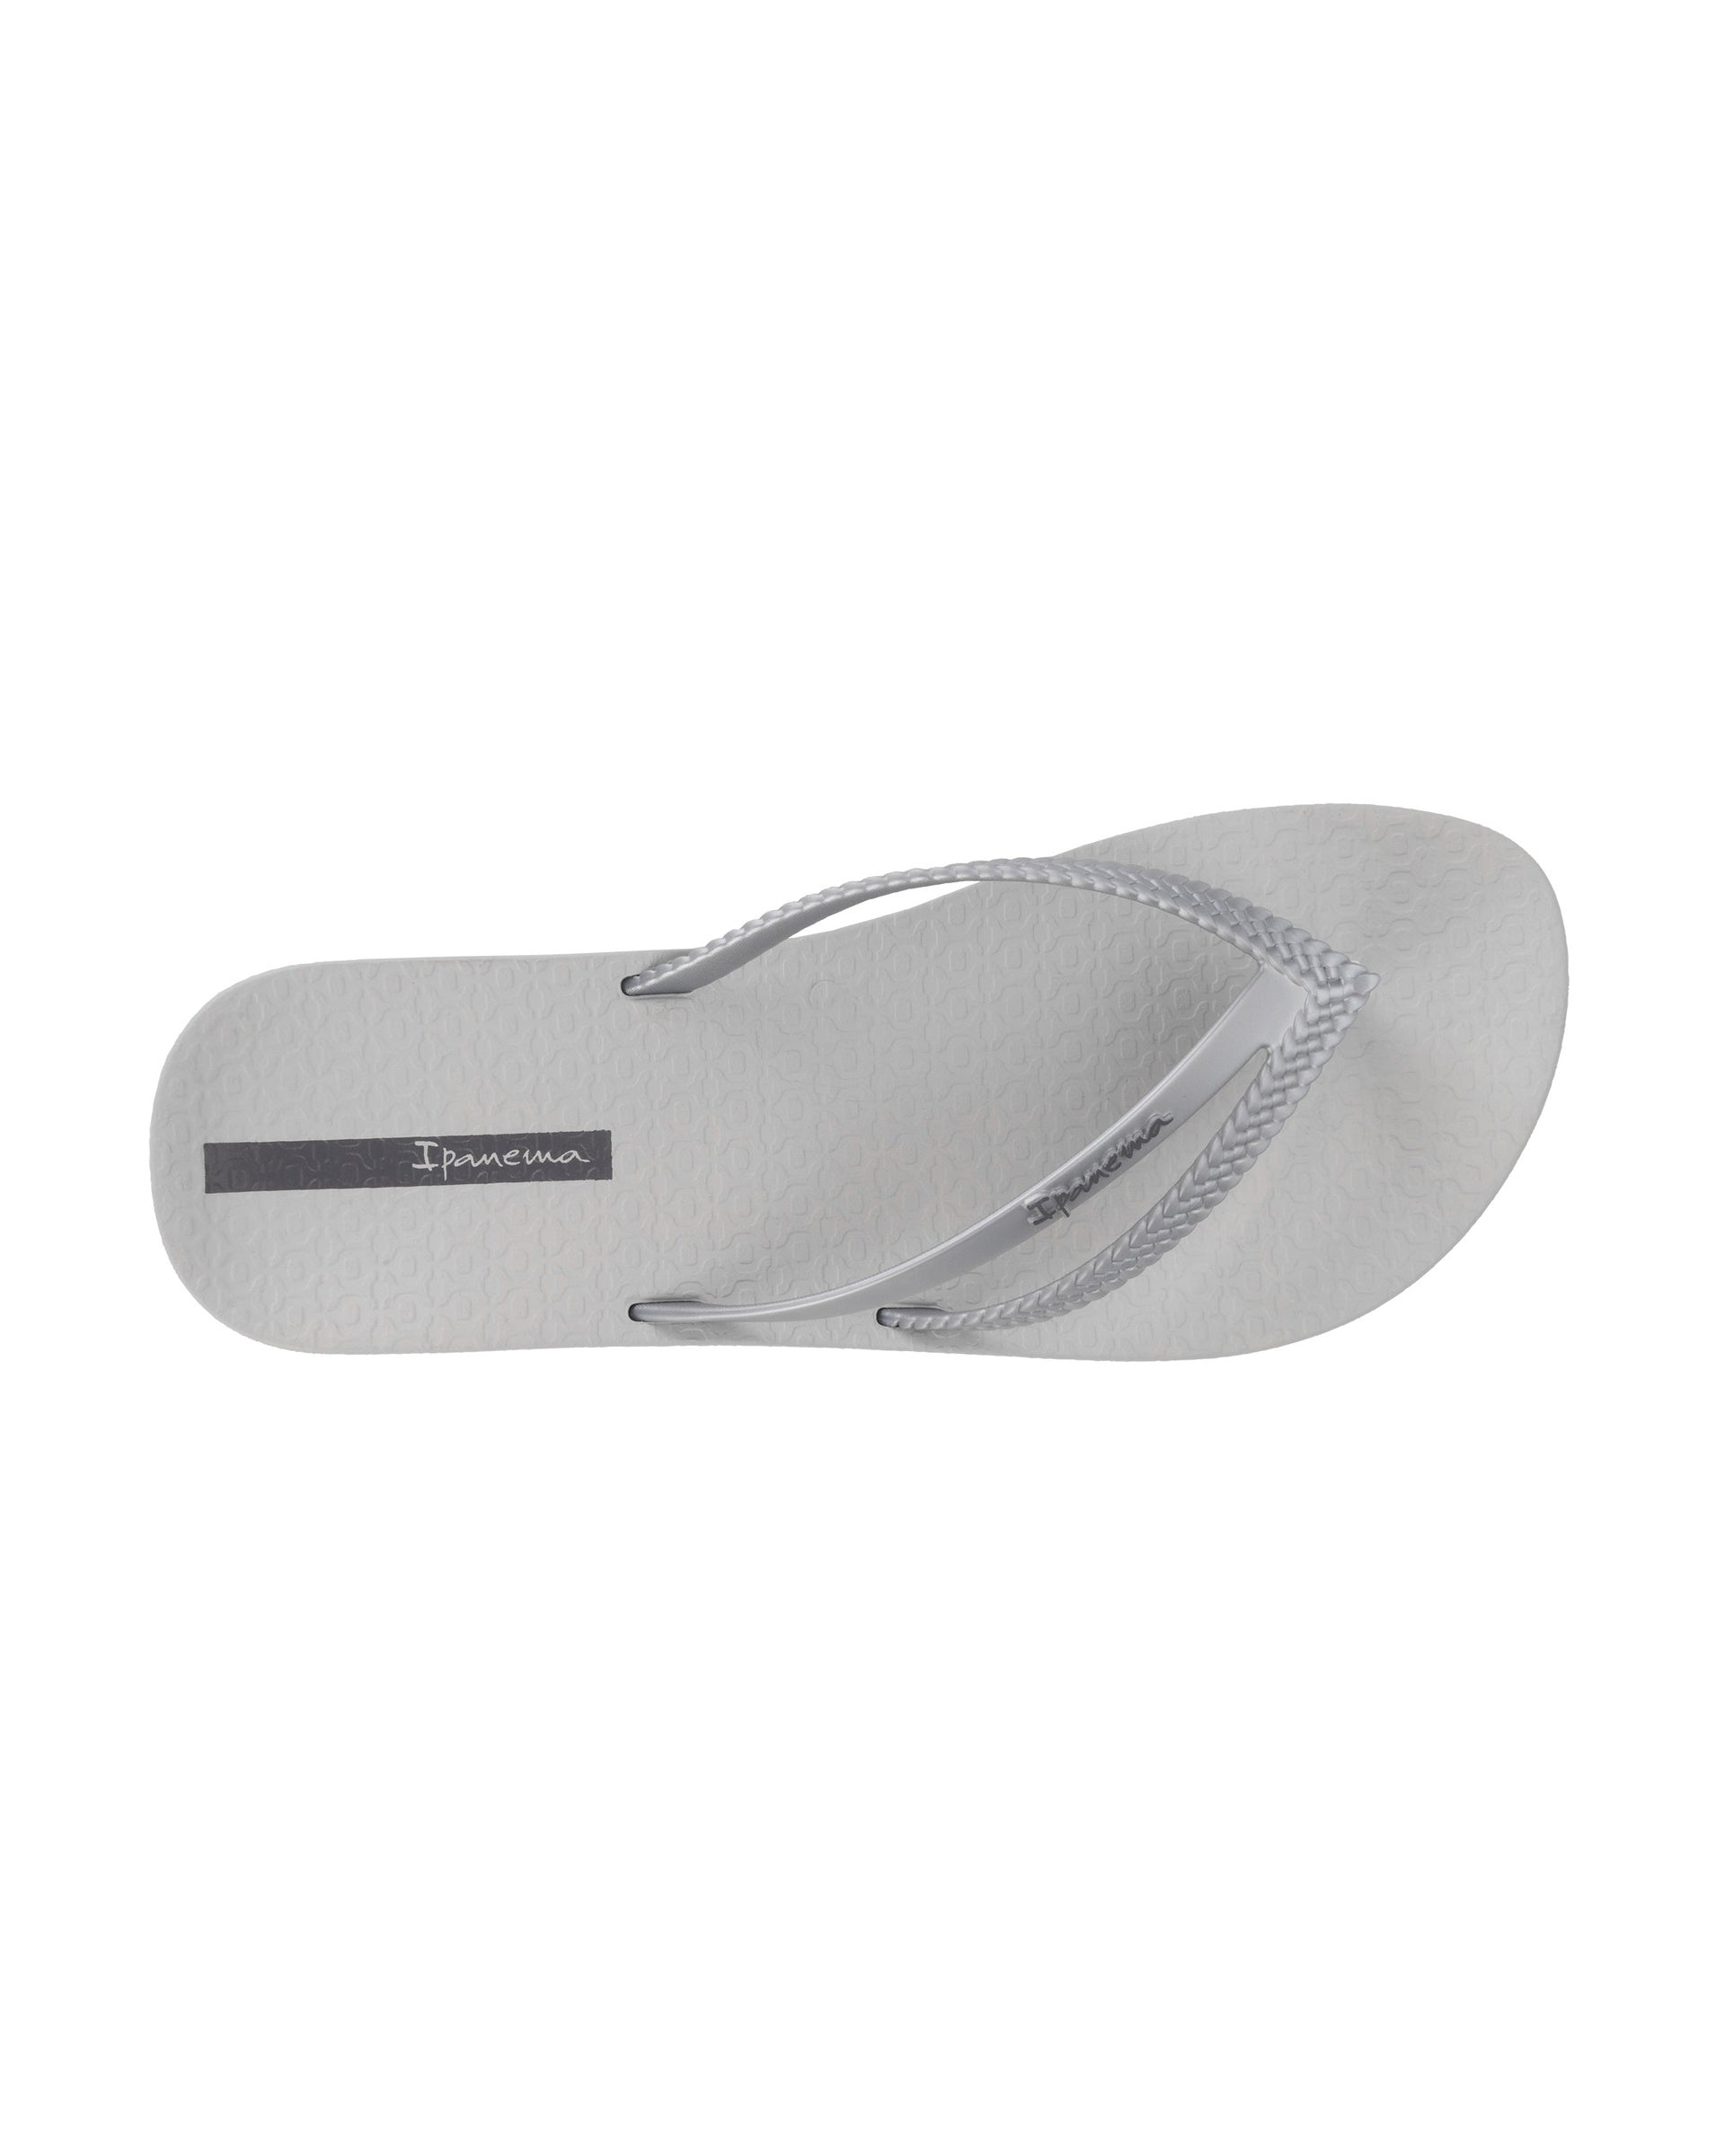 Top view of a grey Ipanema Bossa Soft women's flip flop with metallic grey straps.